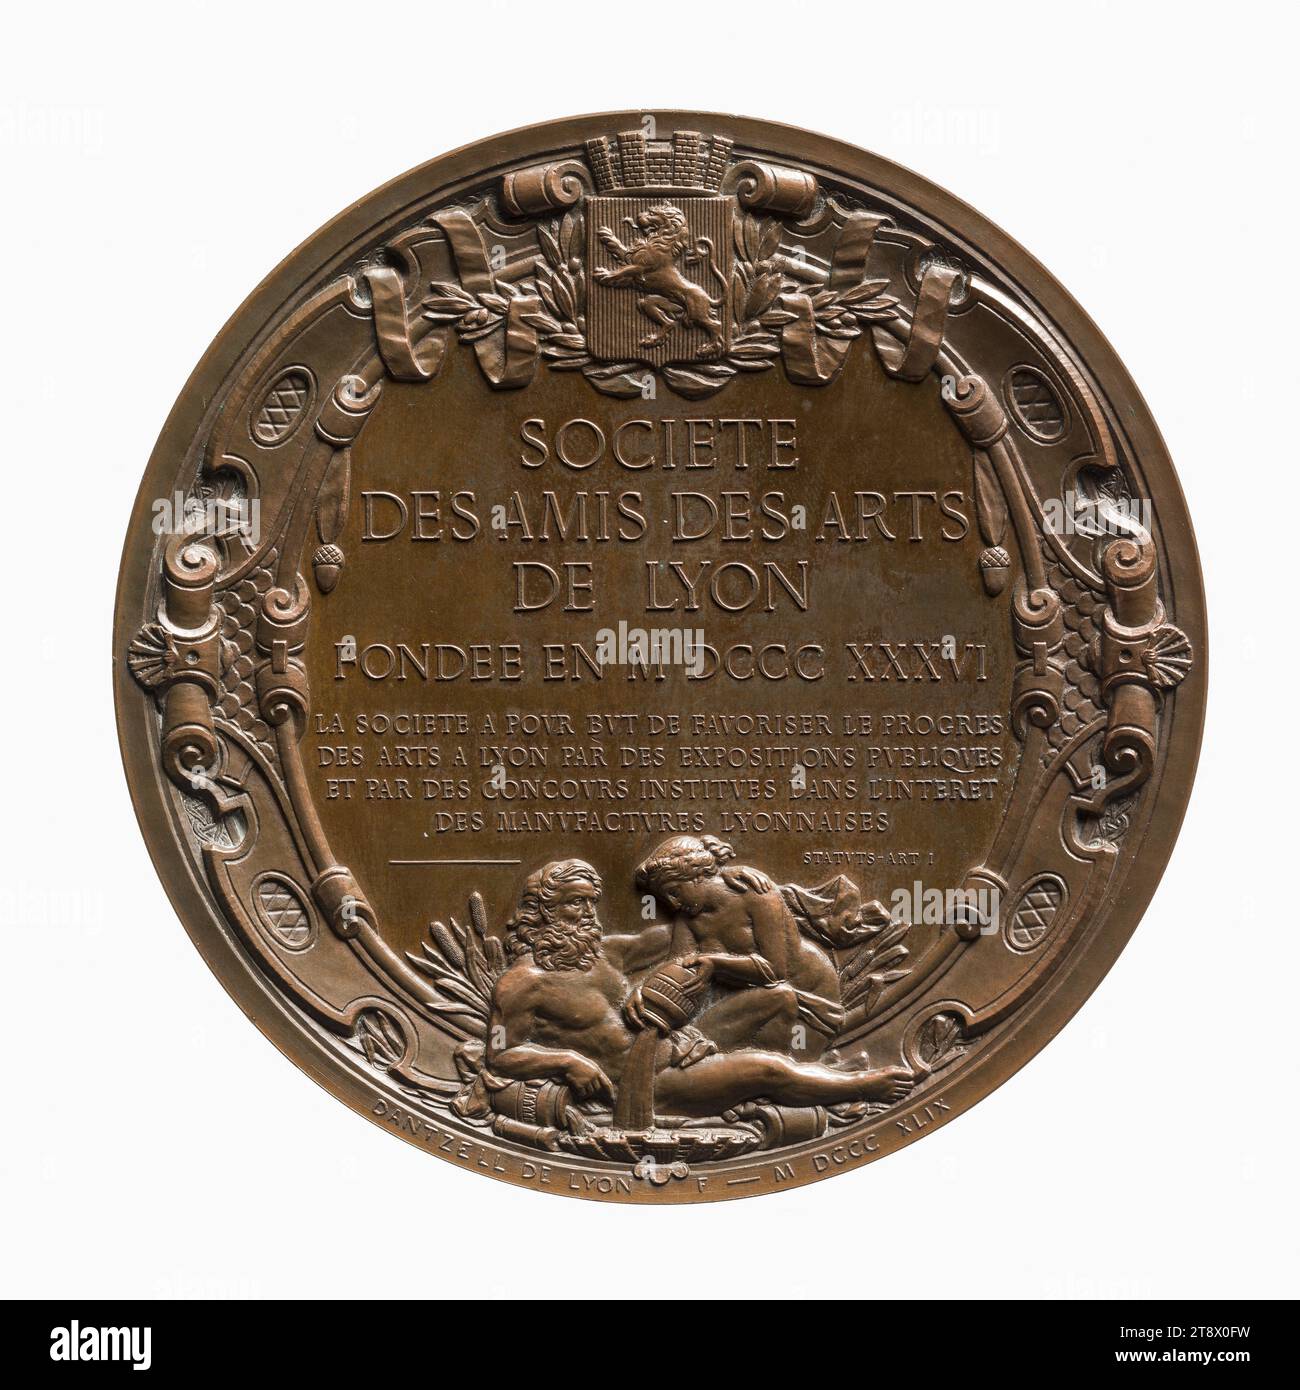 Medal of the Society of Friends of the Arts of Lyon founded in 1836, 1849, Dantzell, Joseph, Engraver in medals, Array, Numismatics, Medal, Dimensions - Work: Diameter: 8.1 cm, Weight (type dimension): 256.29 g Stock Photo